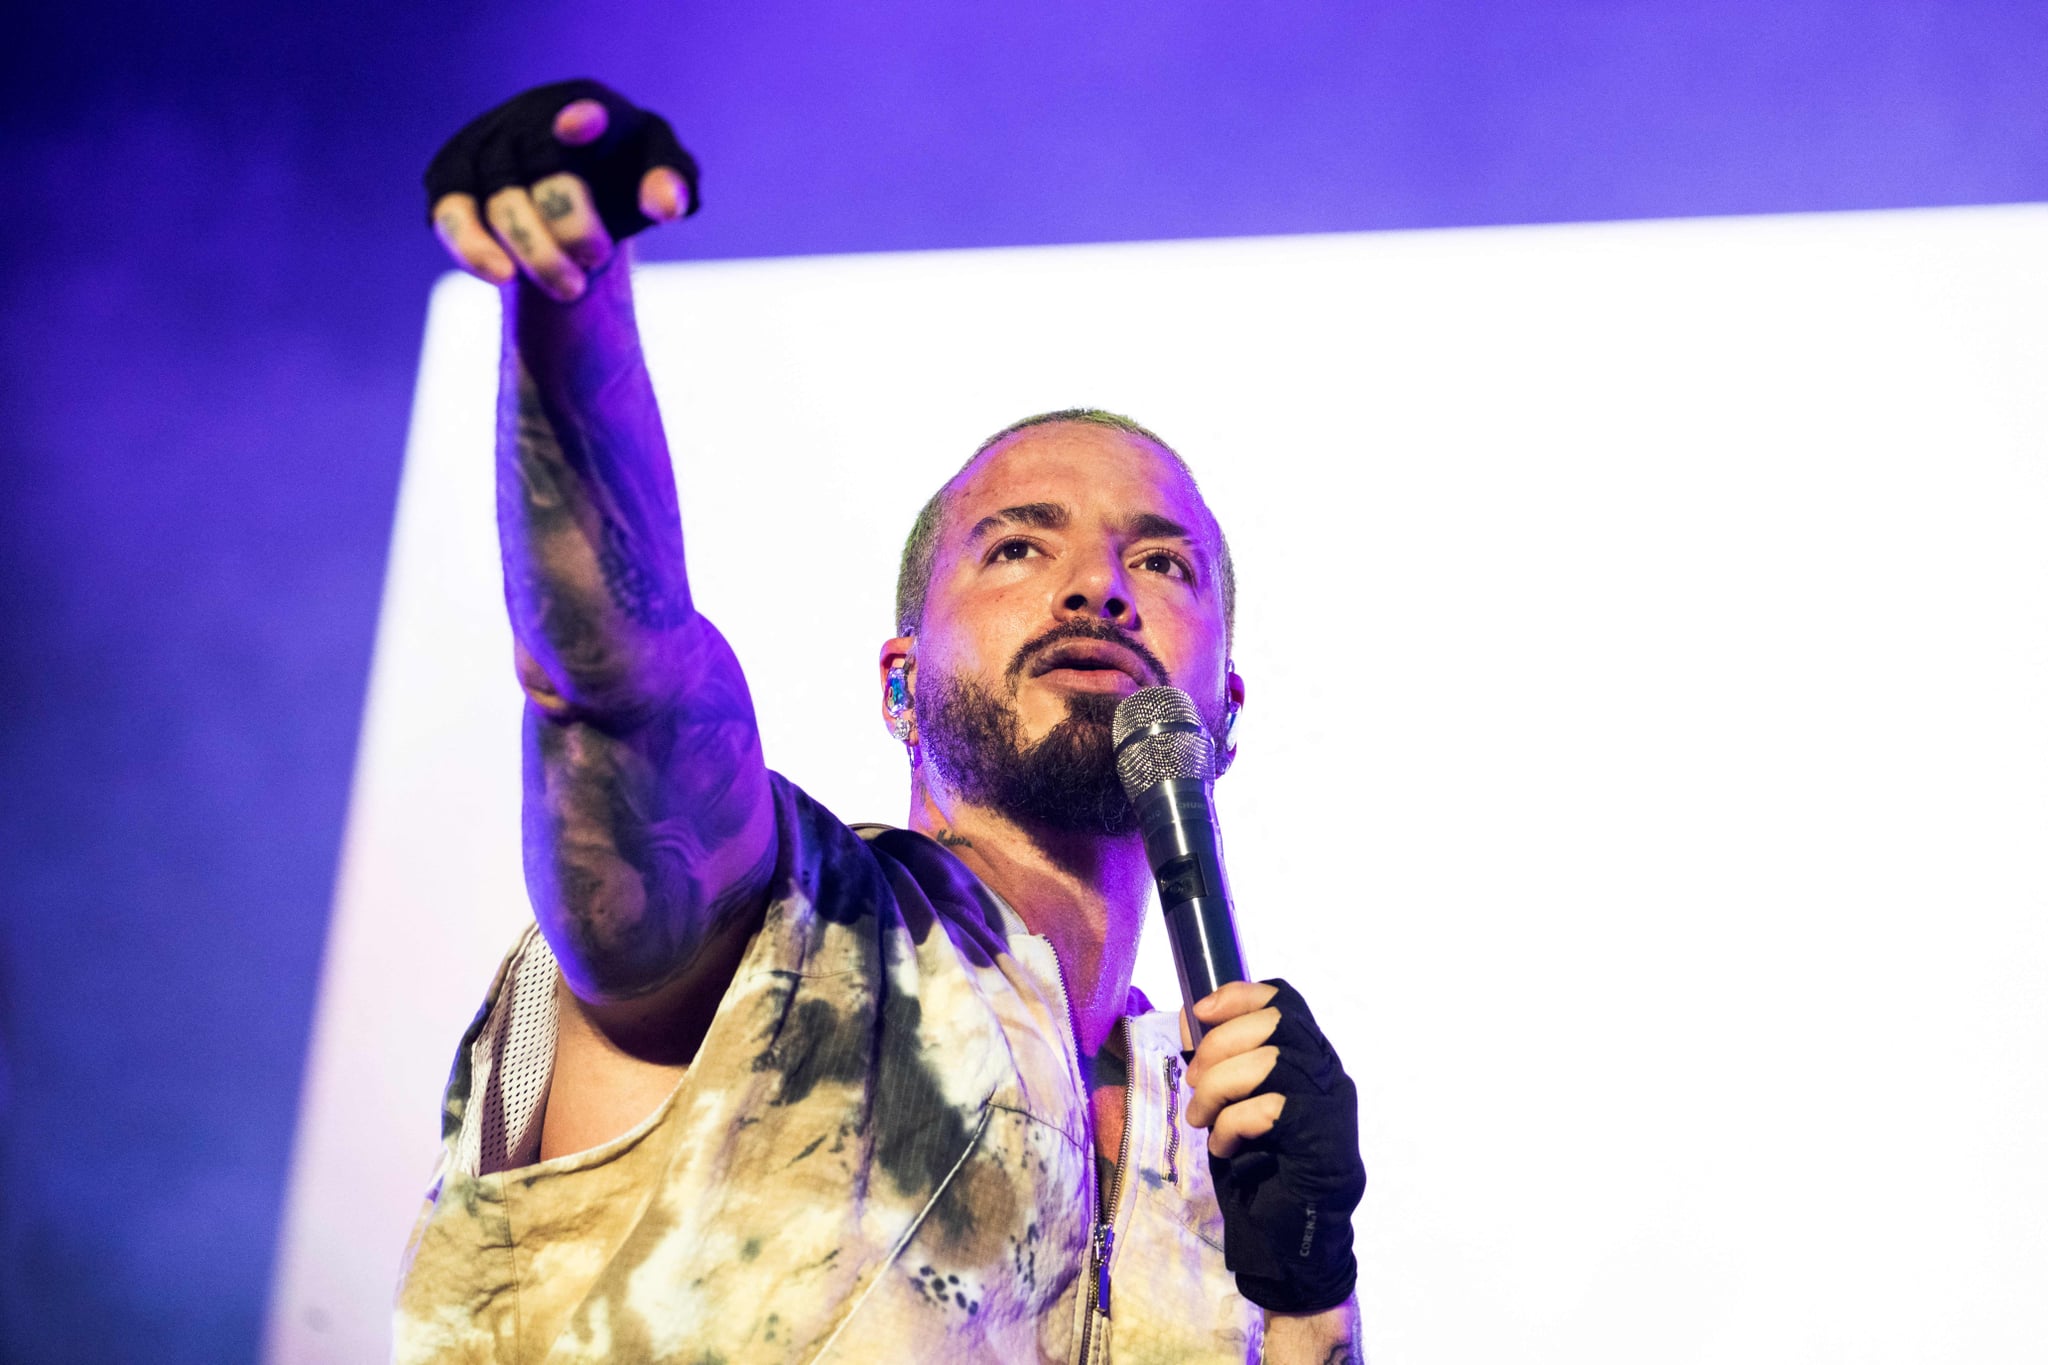 Colombian singer Jose Alvaro Osorio Balvin aka J Balvin performs during the 25th edition of the Solidays Music Festival at the Hippodrome de Longchamp race course, in Paris on June 24, 2023. (Photo by Julie SEBADELHA / AFP) (Photo by JULIE SEBADELHA/AFP via Getty Images)